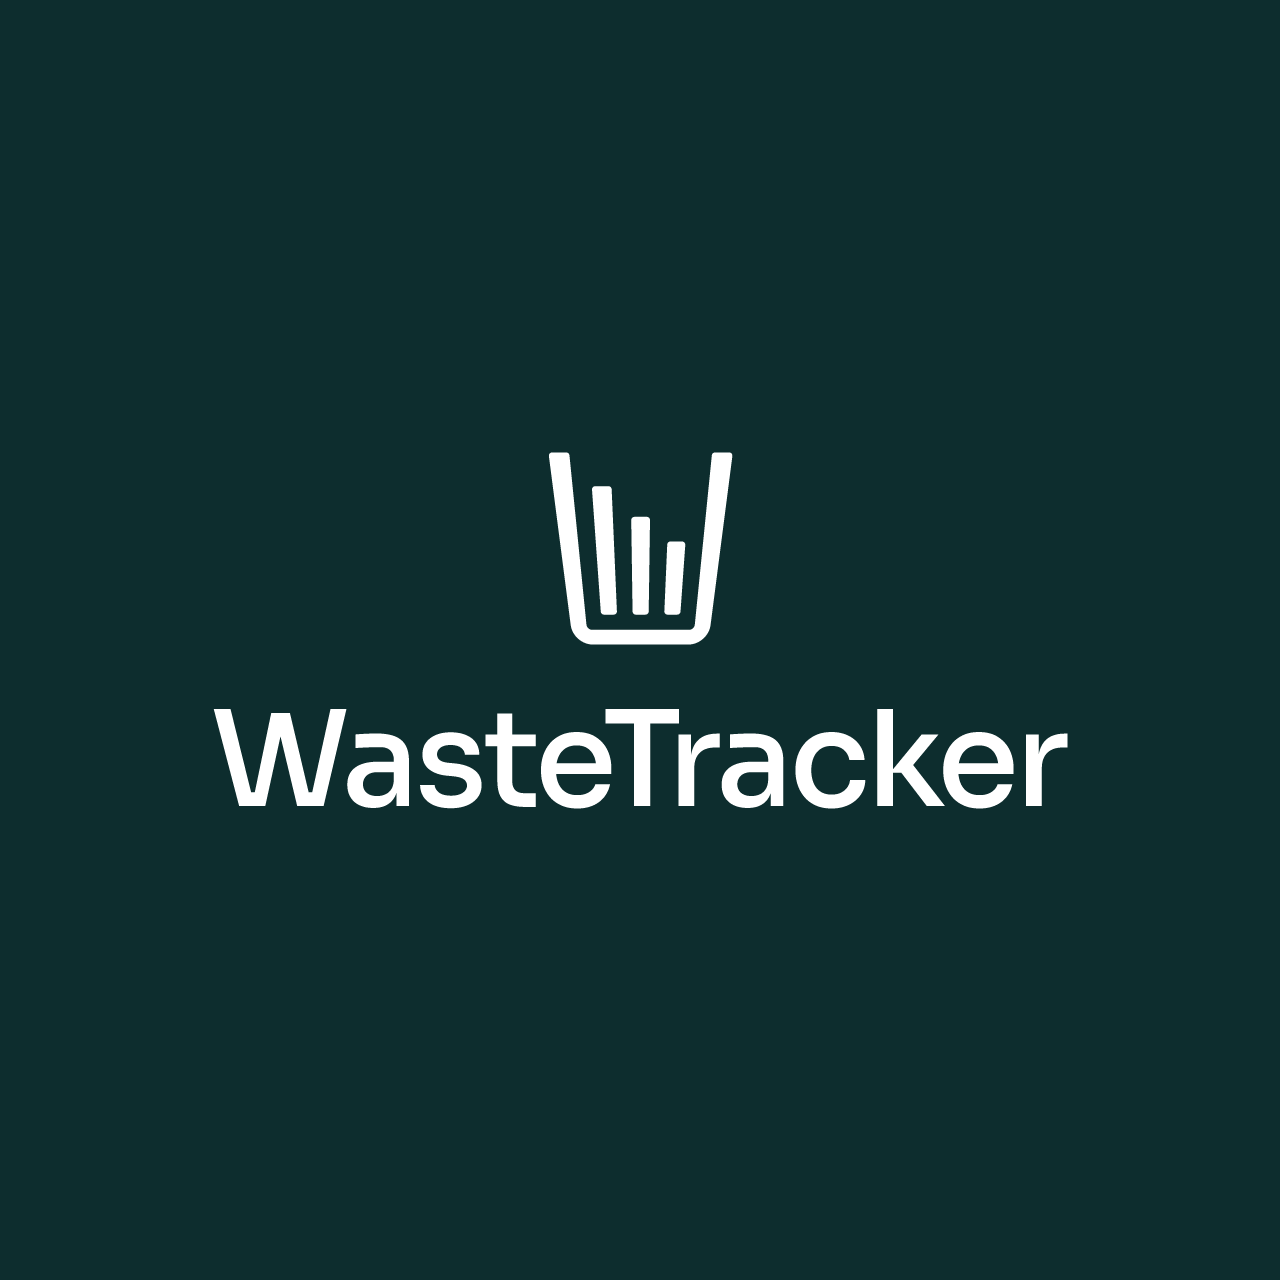 Another vertical version of the WasteTracker logo, providing design flexibility